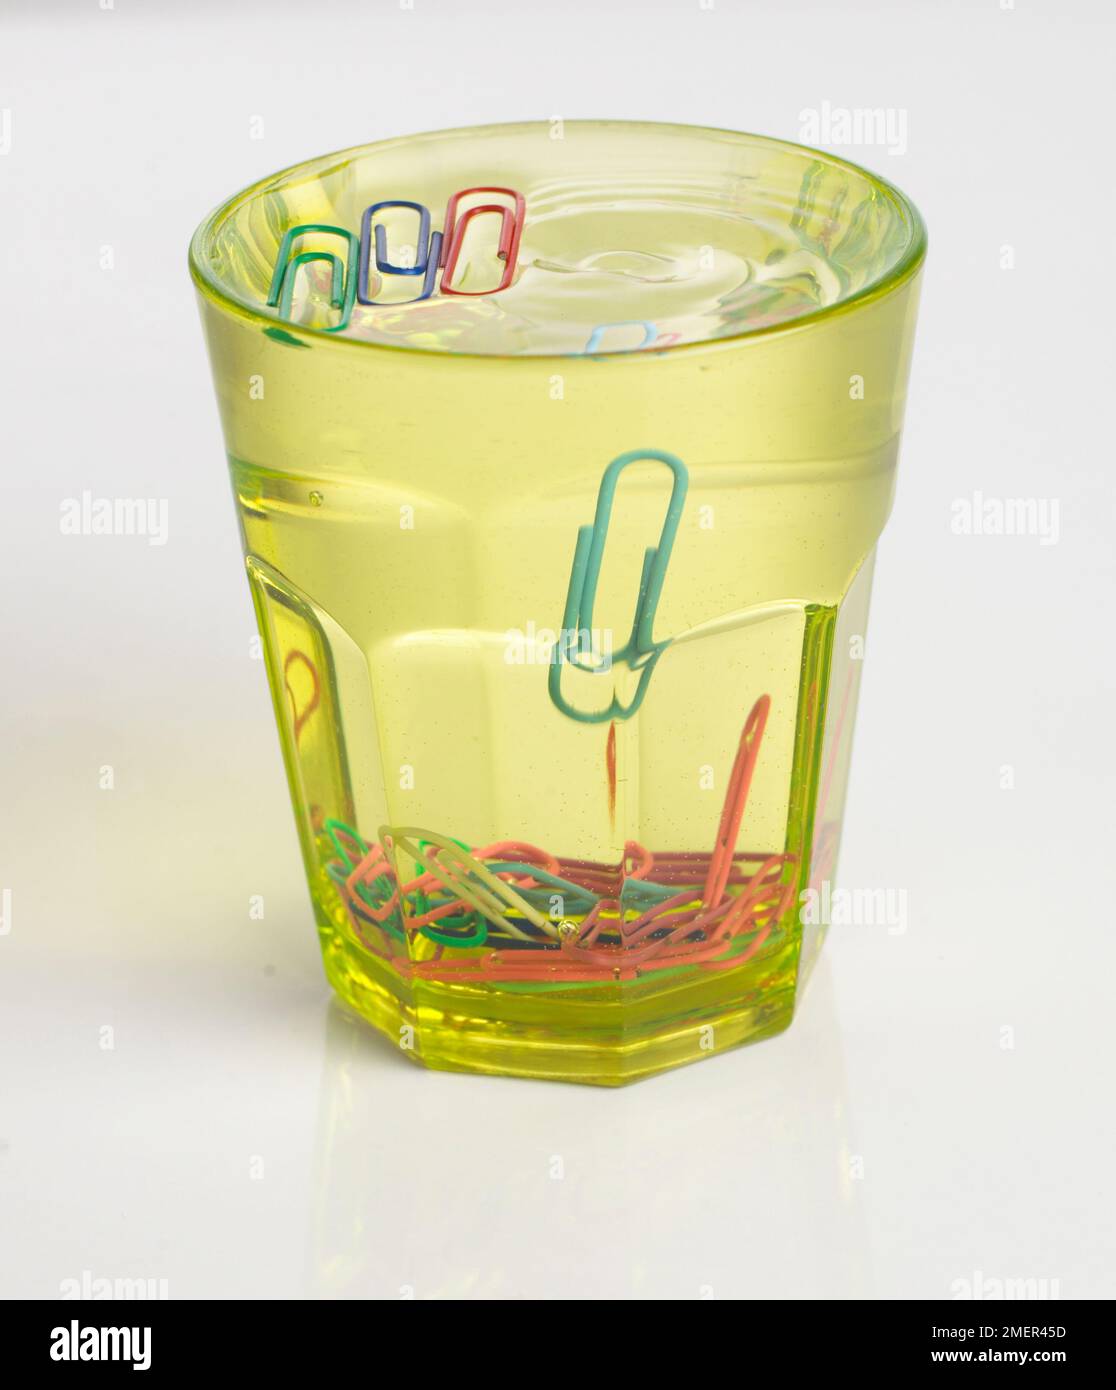 Coloured paperclips in the bottom and floating in full glass of water Stock Photo